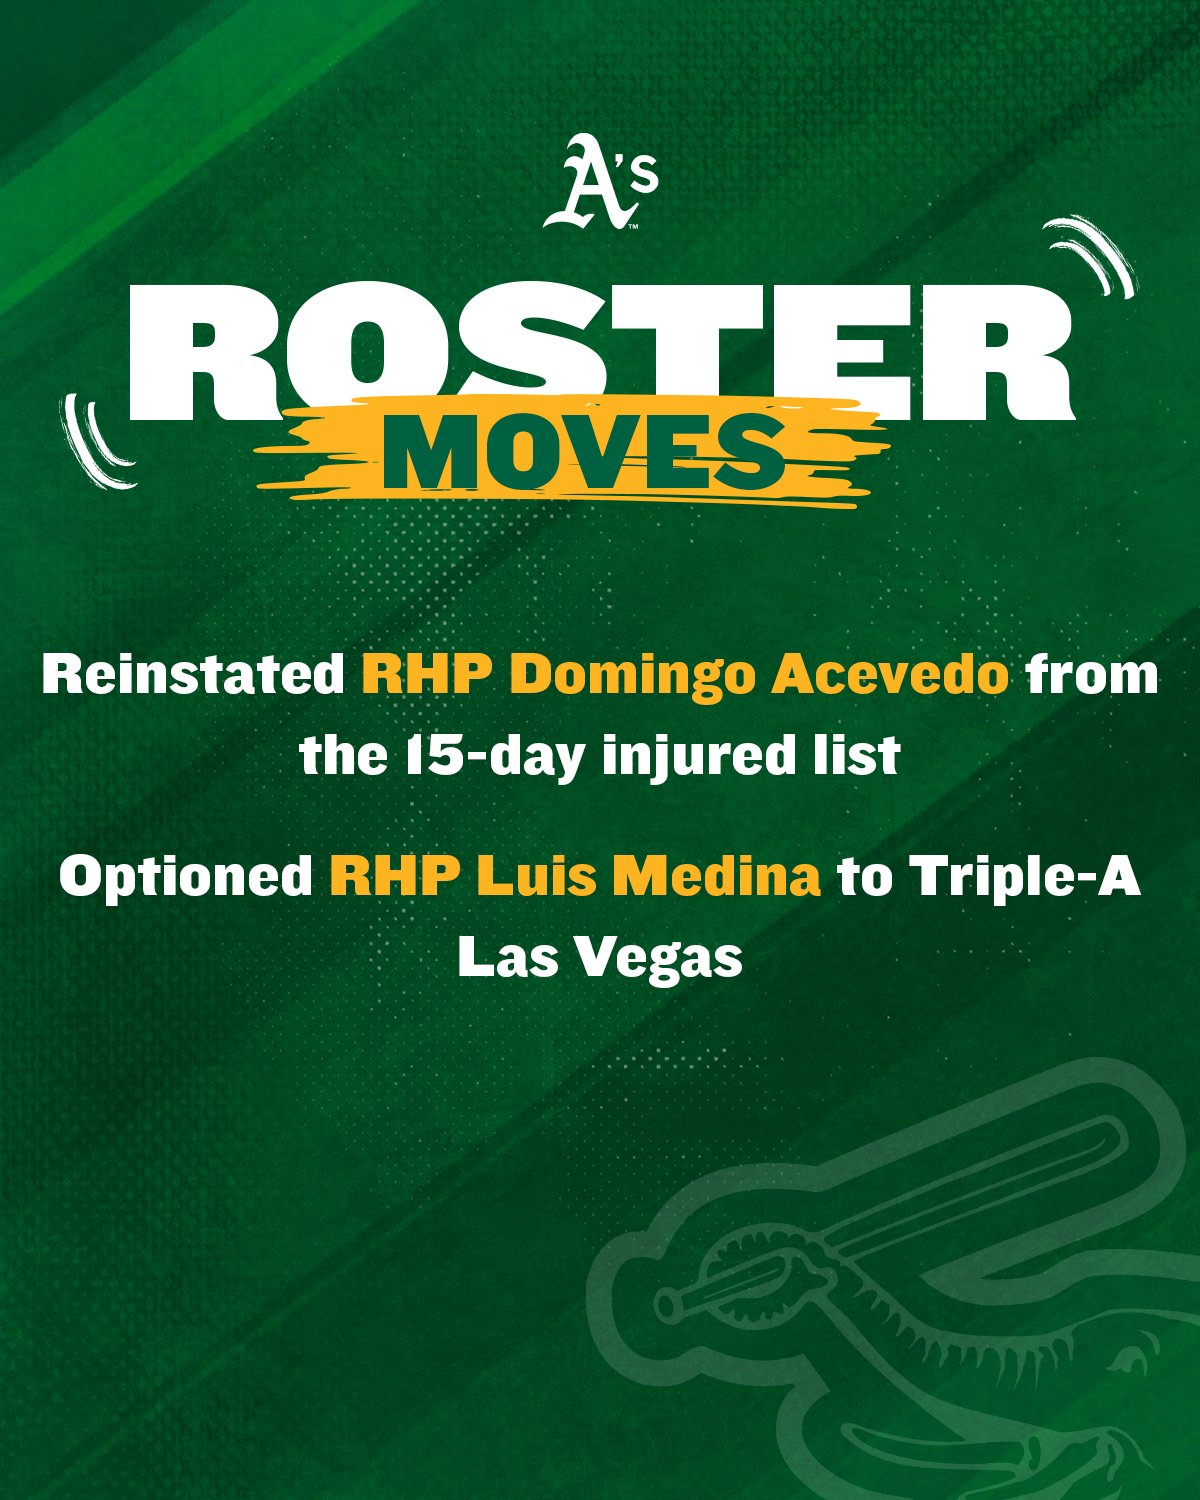 Green graphic with gold and white text that reads the A’s reinstated RHP Domingo Acevedo from the 15-day injured list and optioned RHP Luis Medina to Triple-A Las Vegas.